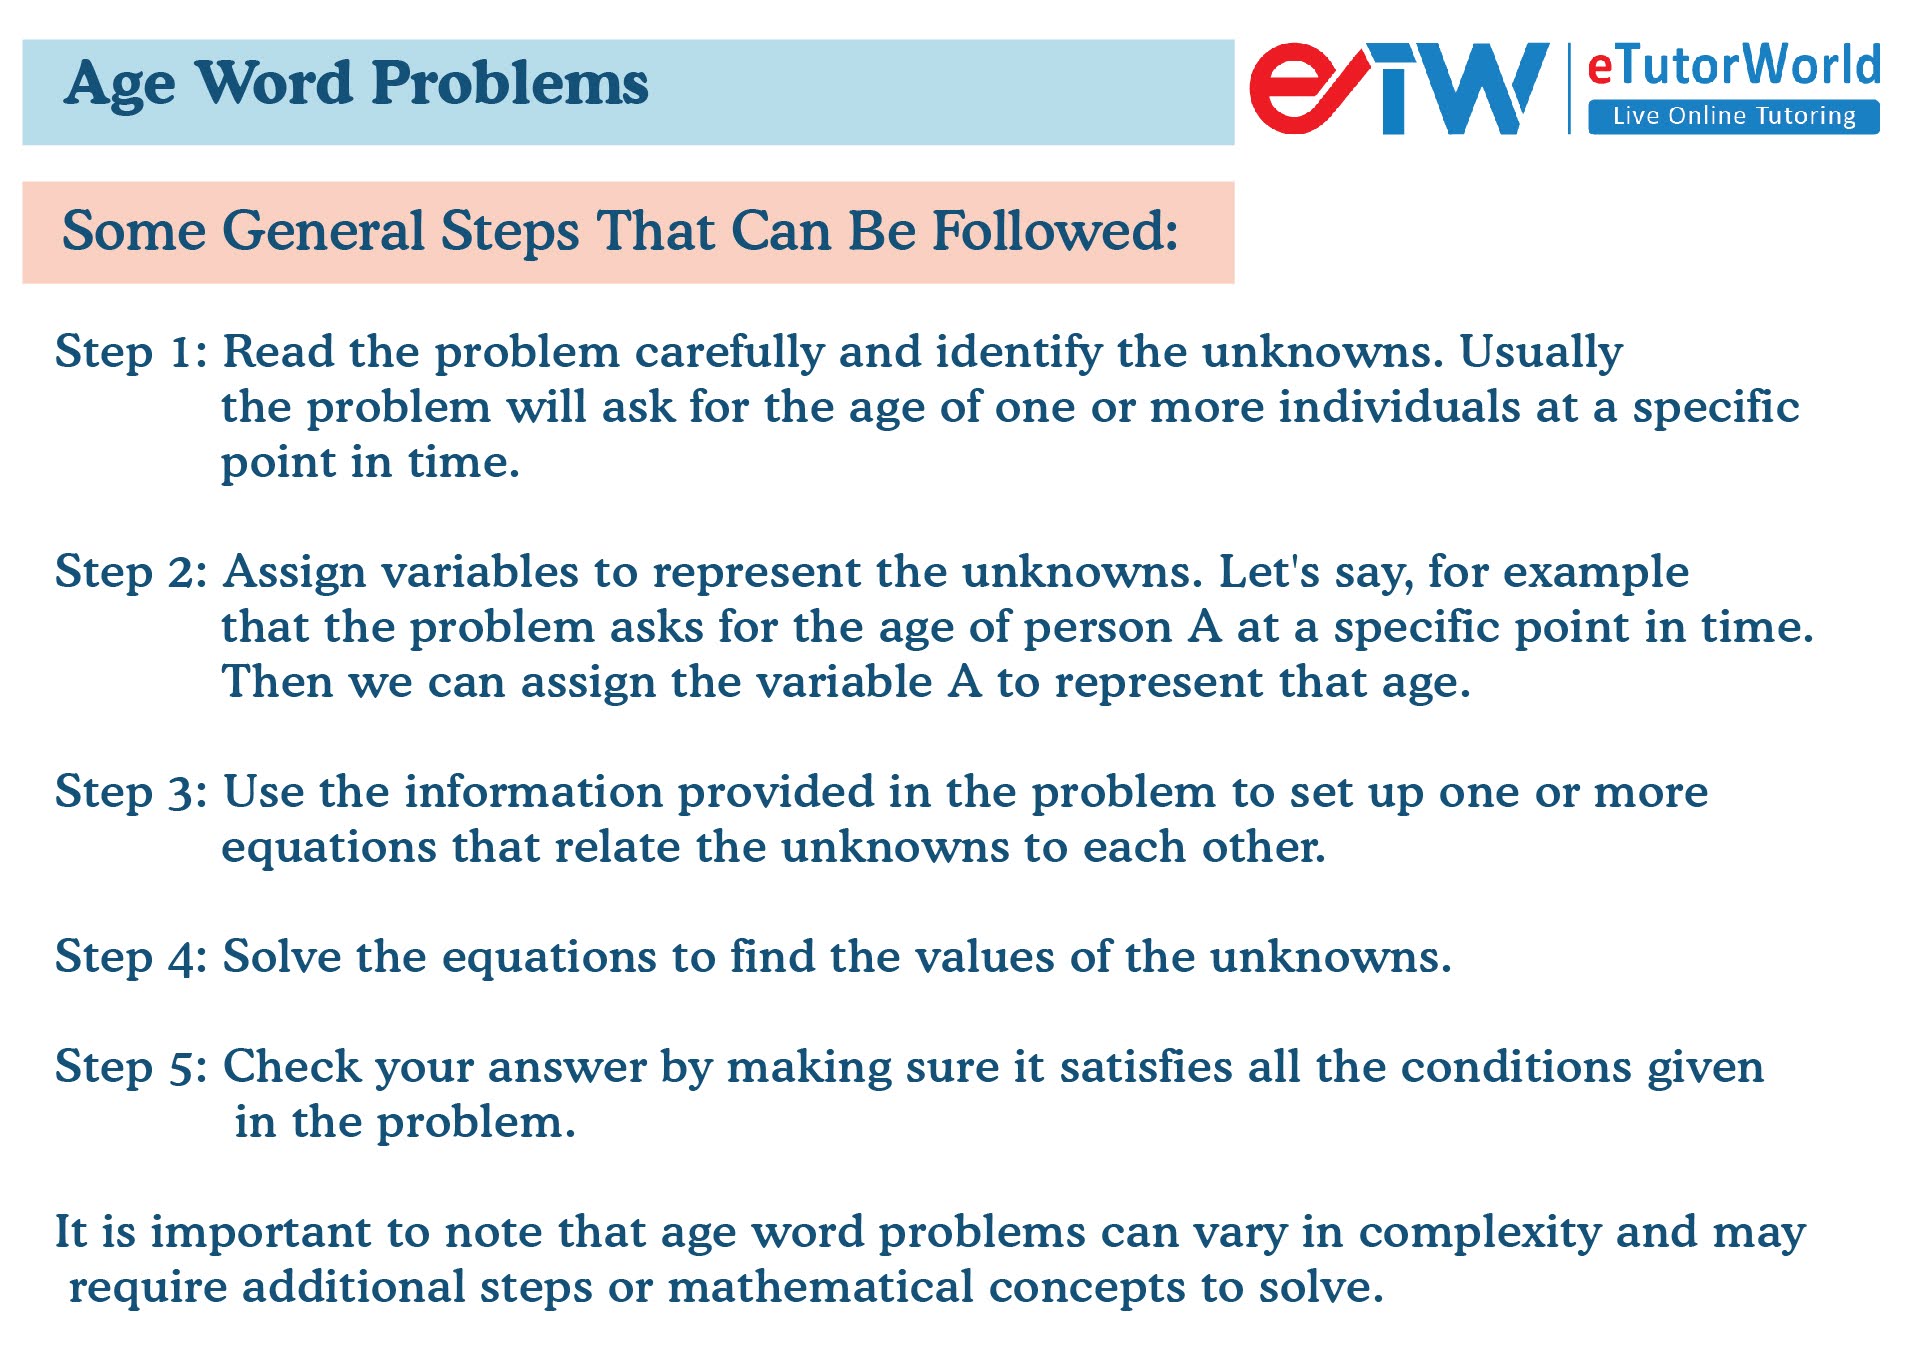 Steps to solve age word problems